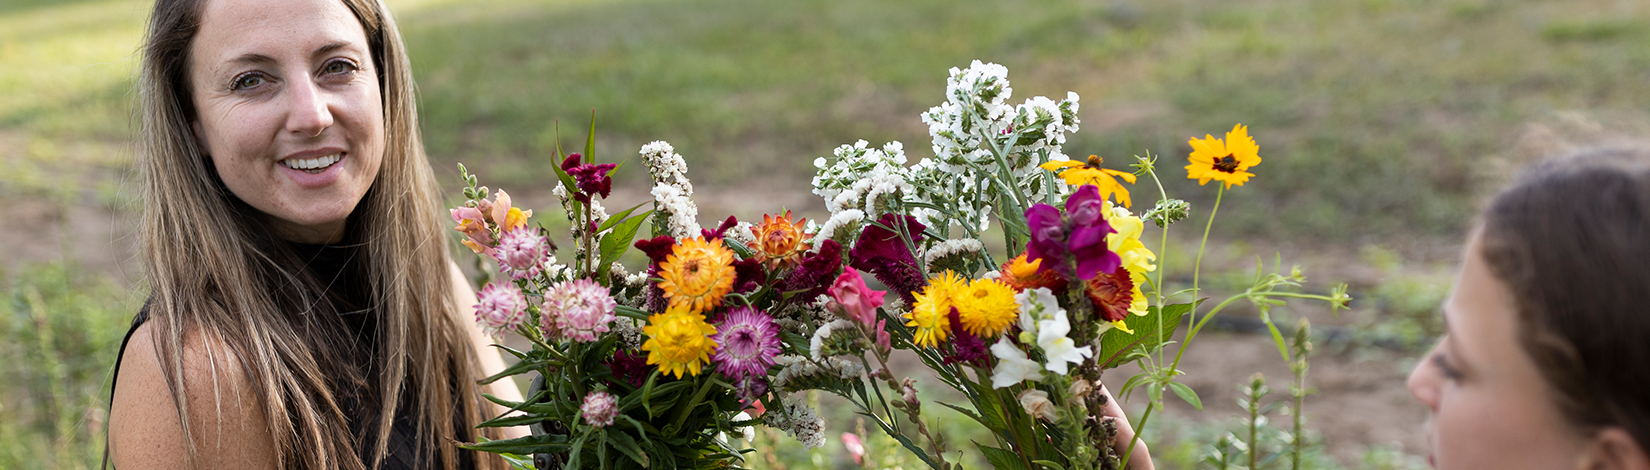 Woman collects a variety of flowers.